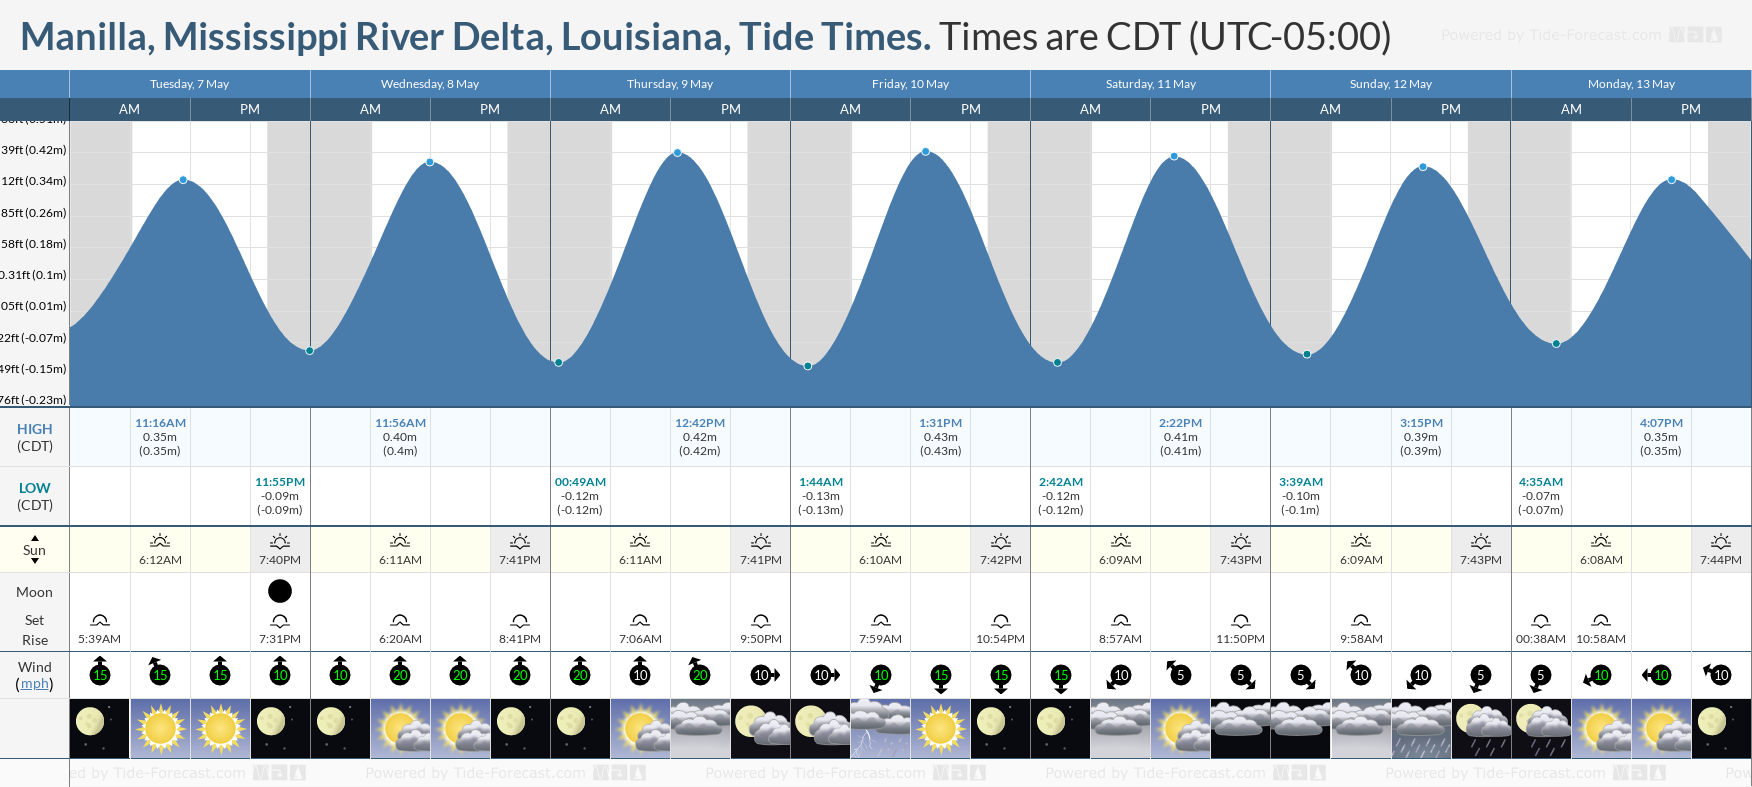 Manilla, Mississippi River Delta, Louisiana Tide Chart including high and low tide tide times for the next 7 days